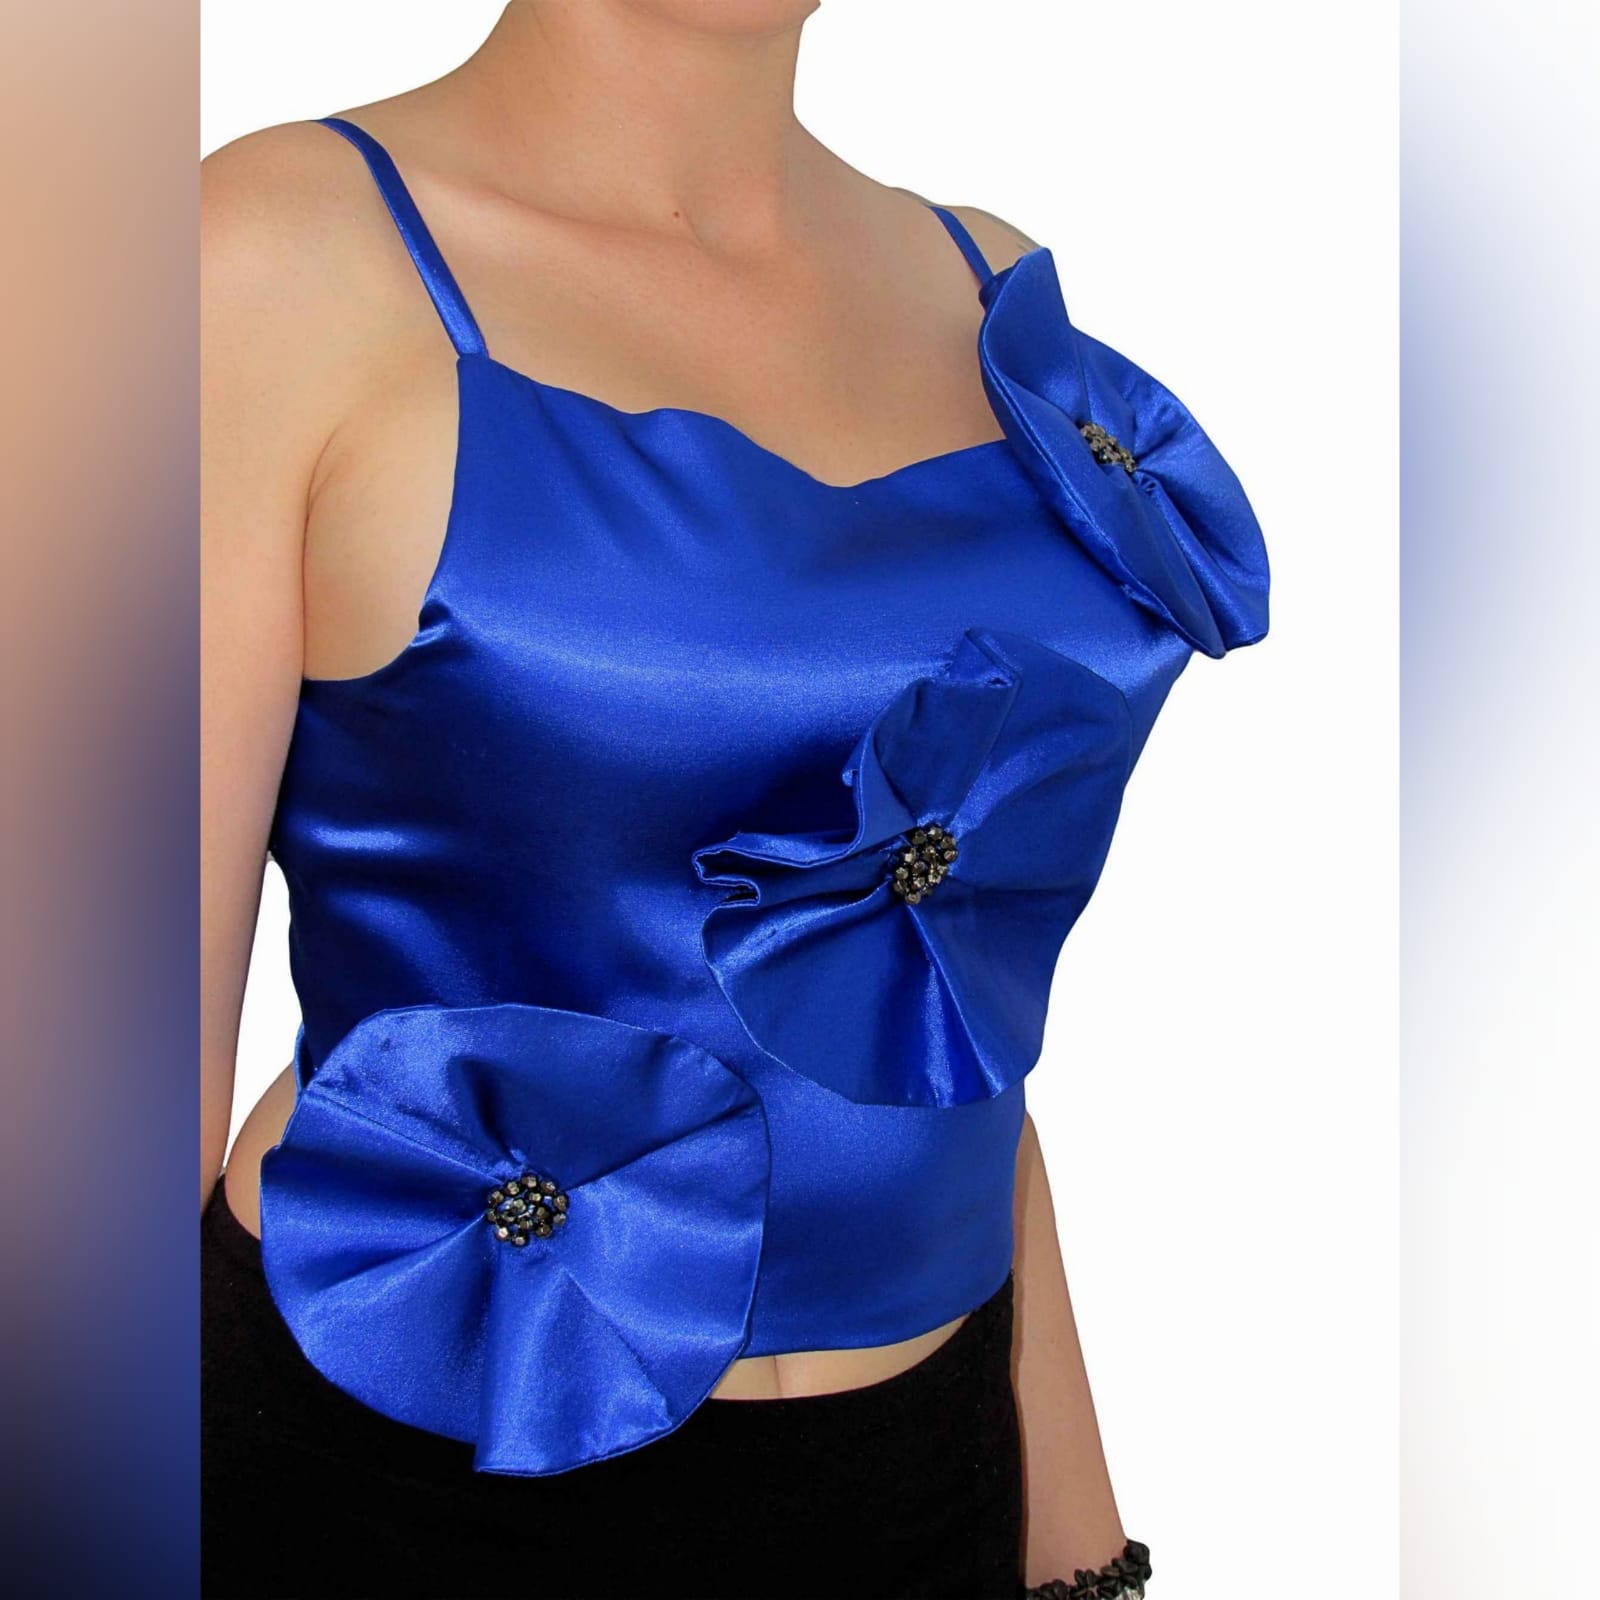 Elegant royal blue flower detail top 1 elegant royal blue flower detail top. Handmade top, a unique design made in several colours. Made in satin with a luxurious shine, perfect for a smart casual event, or even for a more formal event. Made with a lace-up open back to add a sexy touch to the top. And to adjust the fit accordingly.